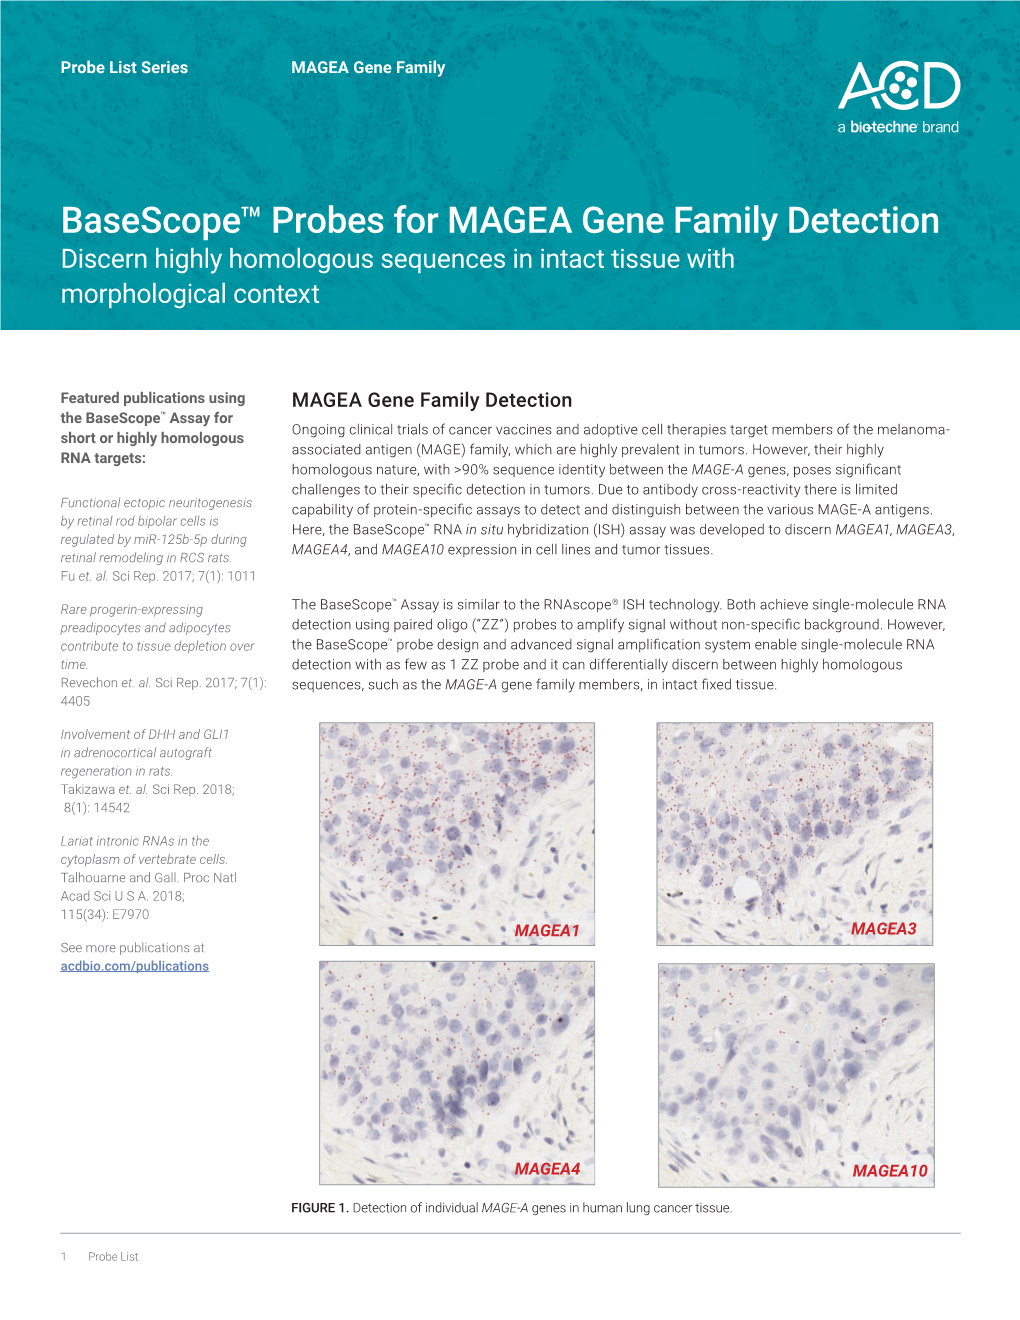 Basescope™ Probes for MAGEA Gene Family Detection Discern Highly Homologous Sequences in Intact Tissue with Morphological Context